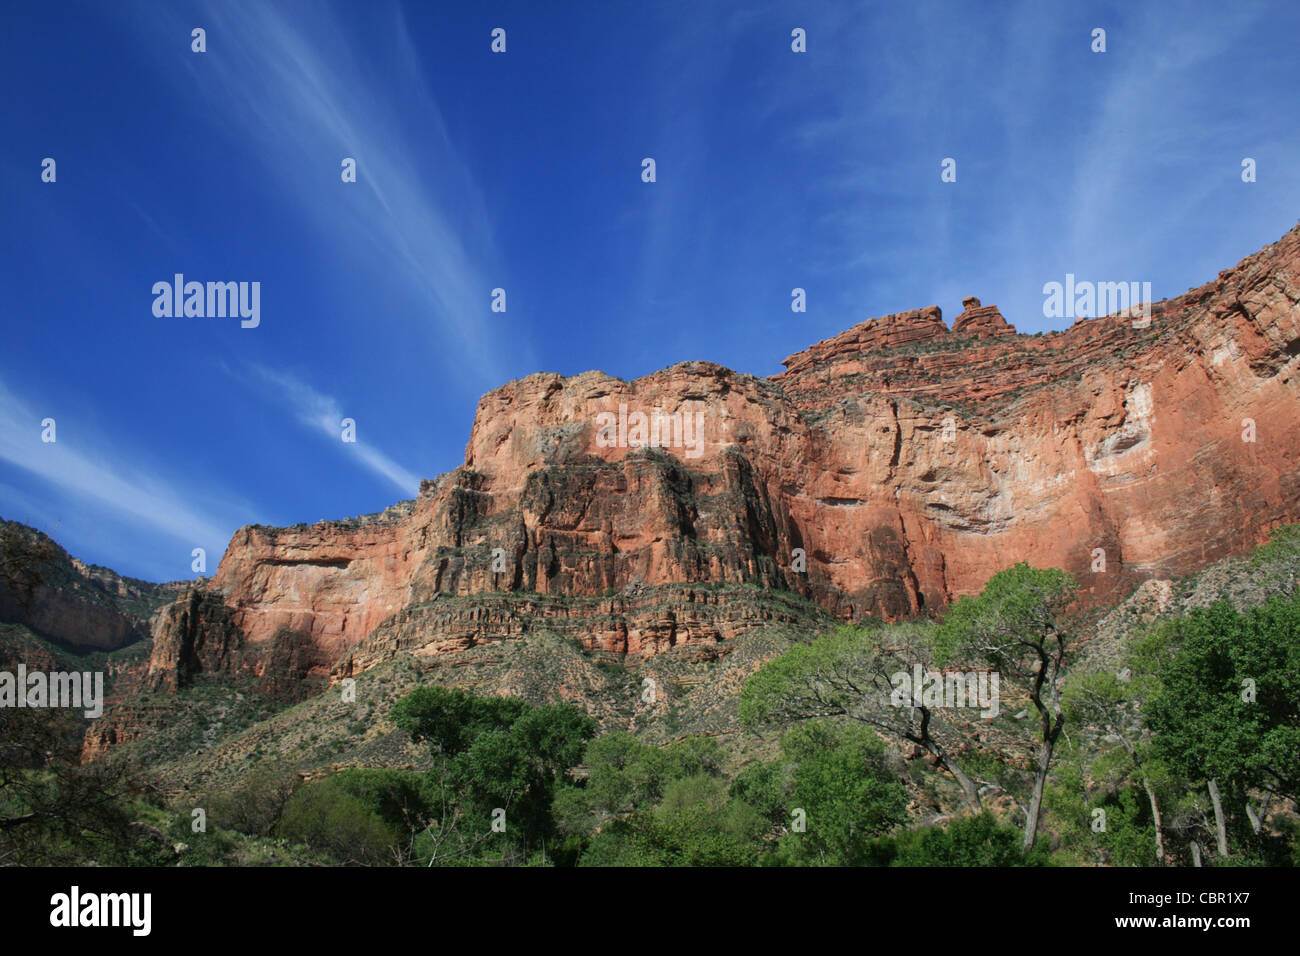 View up to the redwall limestone from Indian Gardens along the Bright Angel Trail in the Grand Canyon Stock Photo